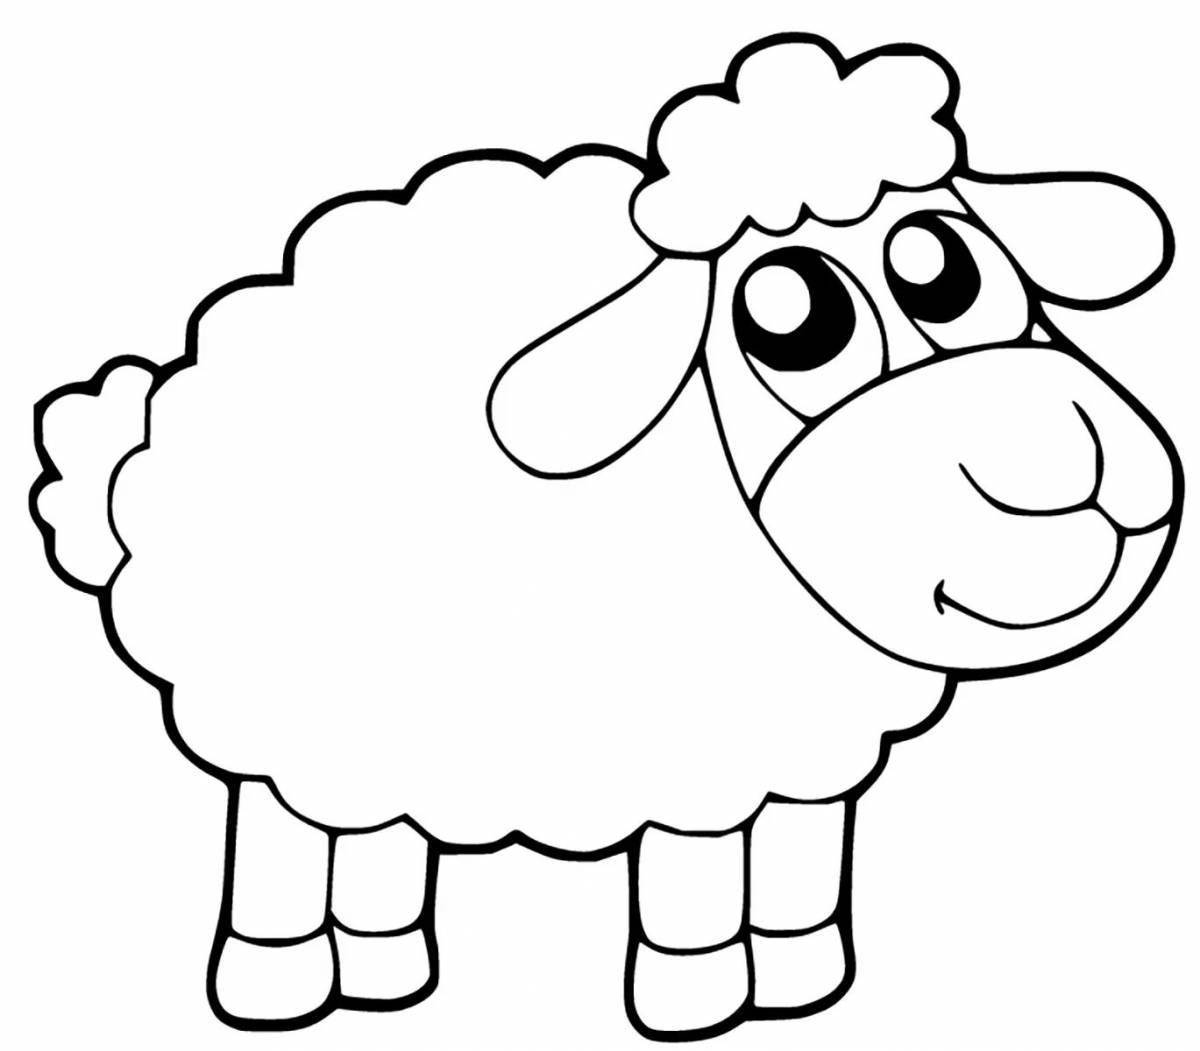 Glowing sheep coloring book for 5-6 year olds